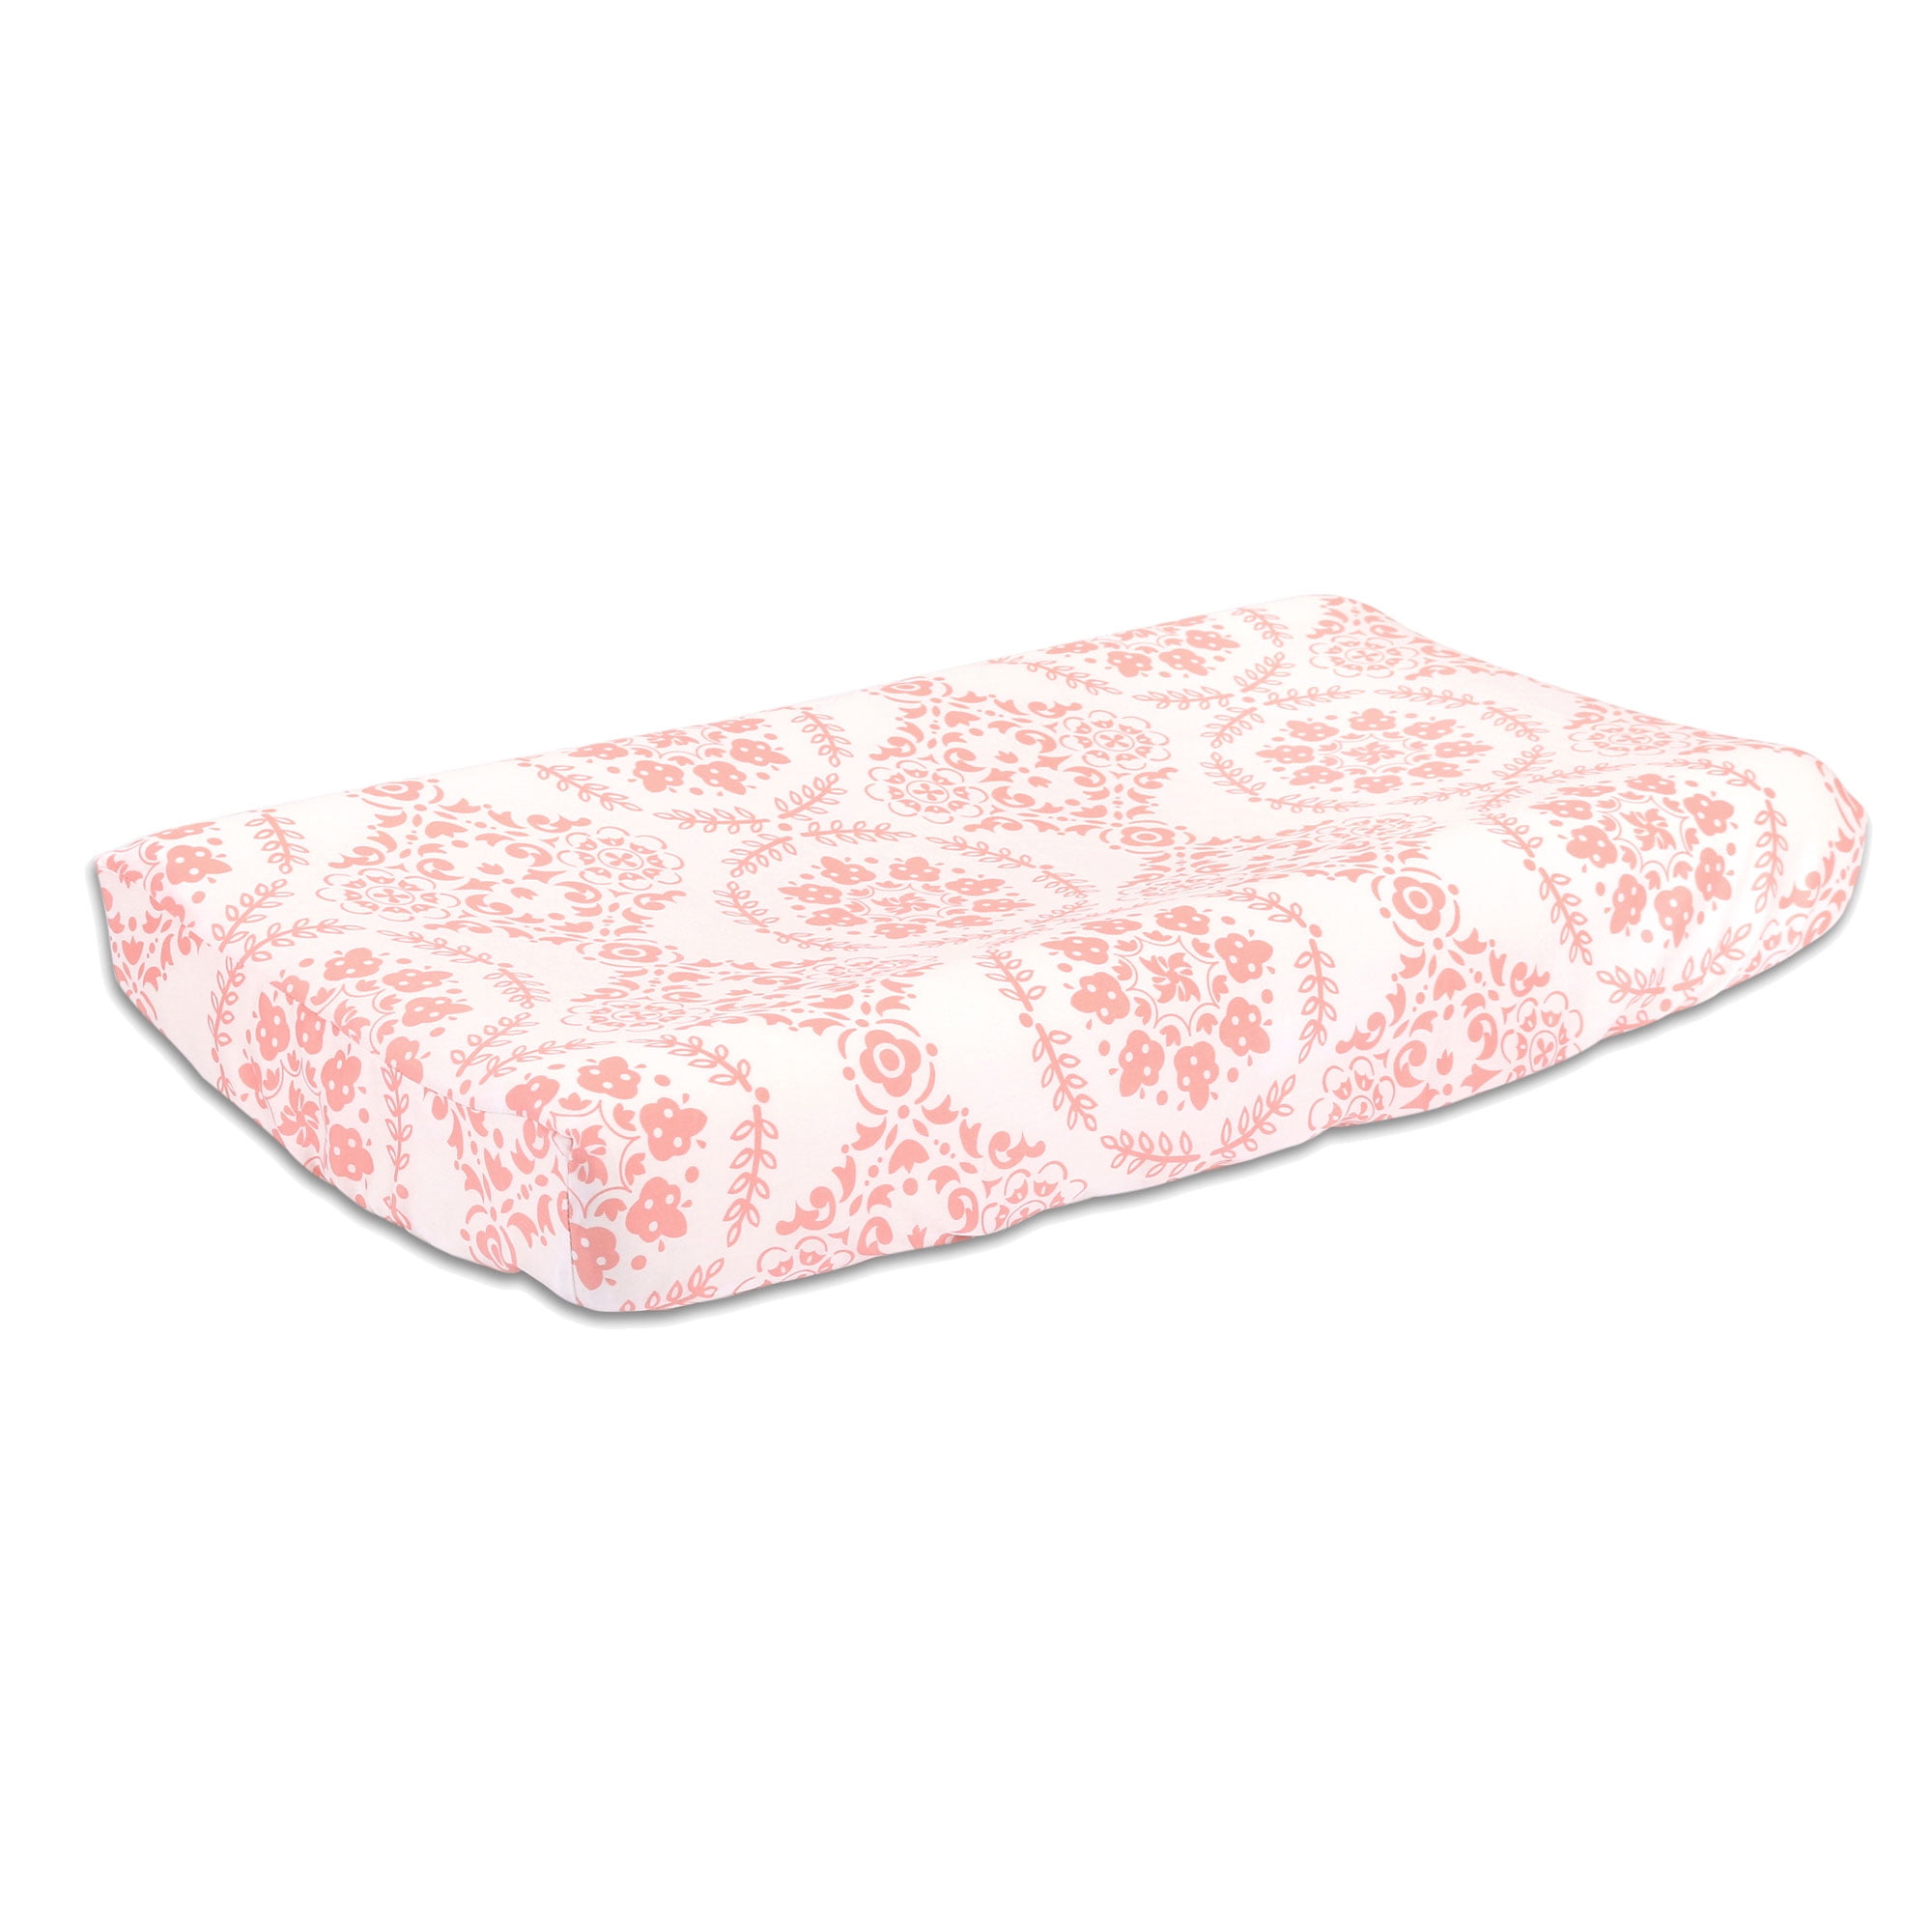 Pink Floral Damask 100% Cotton Changing Pad Cover The Peanut Shell Nursery Decor 